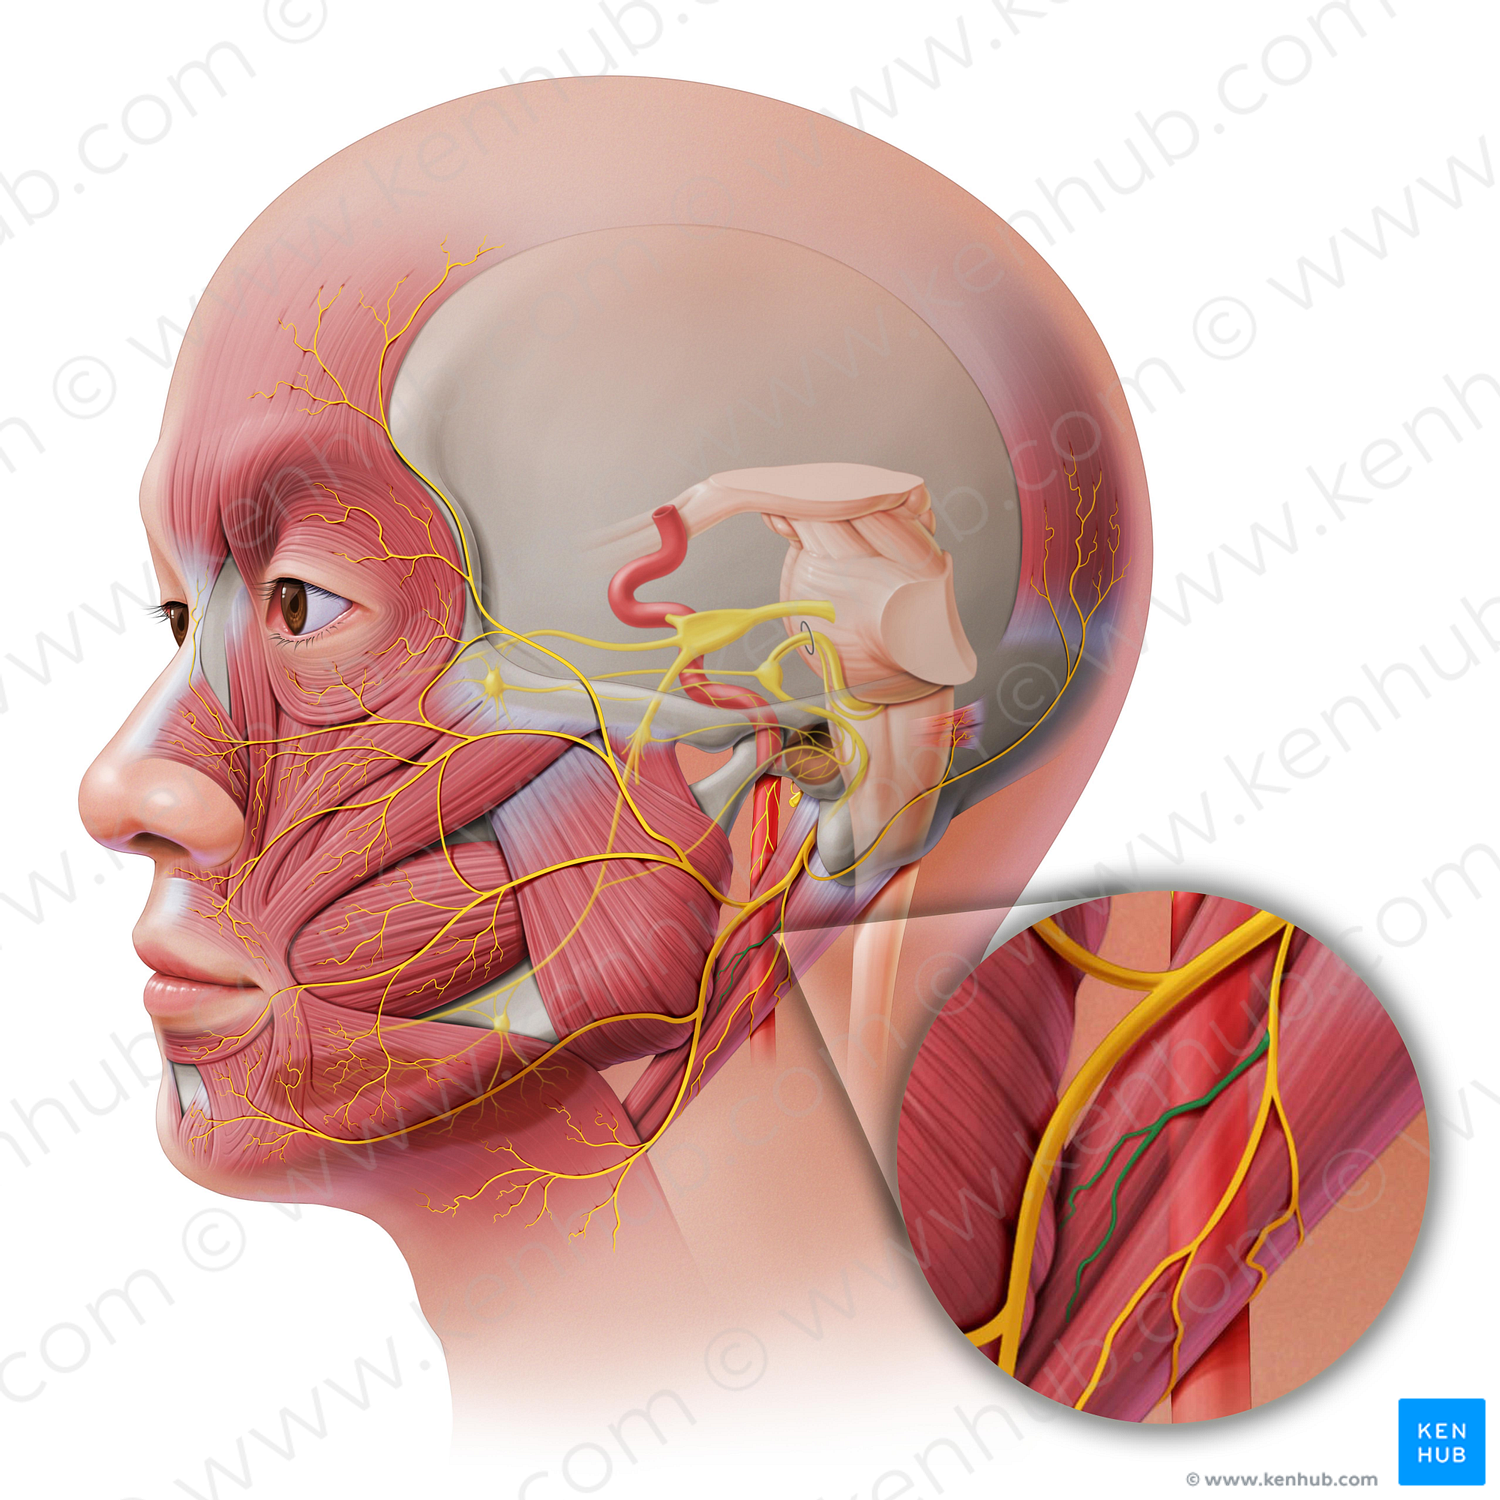 Stylohyoid branch of facial nerve (#8803)